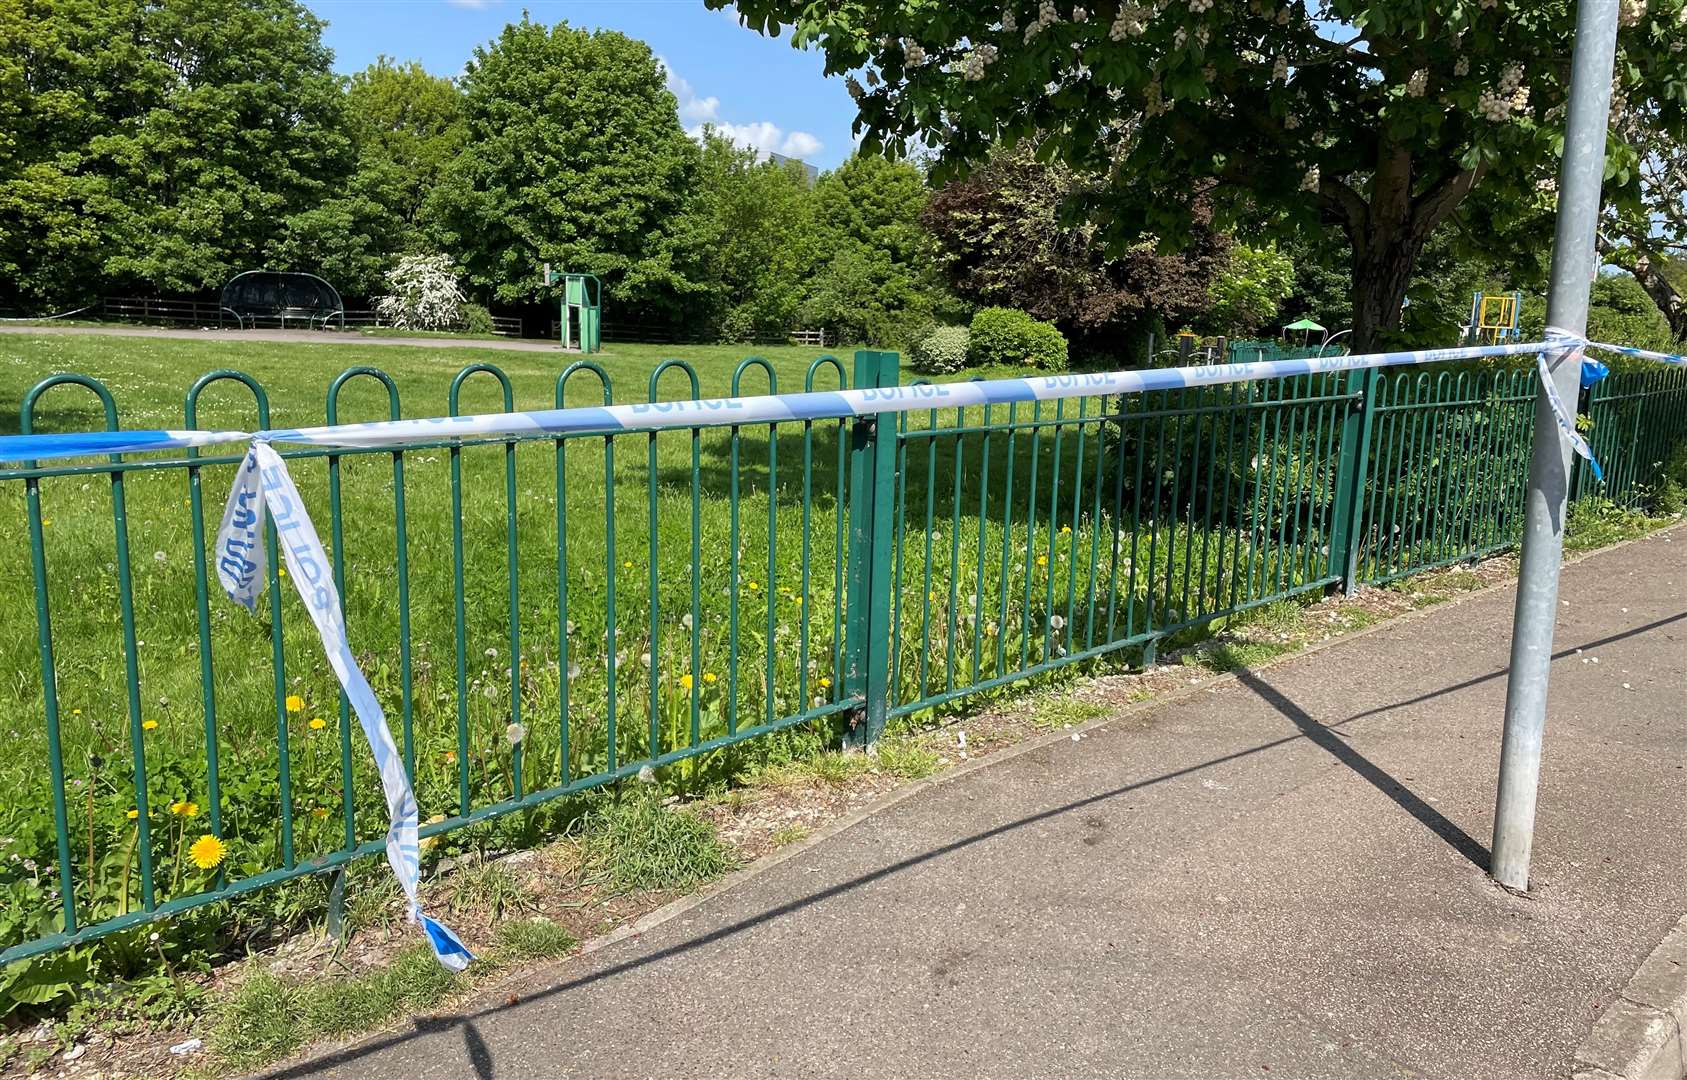 A teenager was stabbed and taken to hospital yesterday